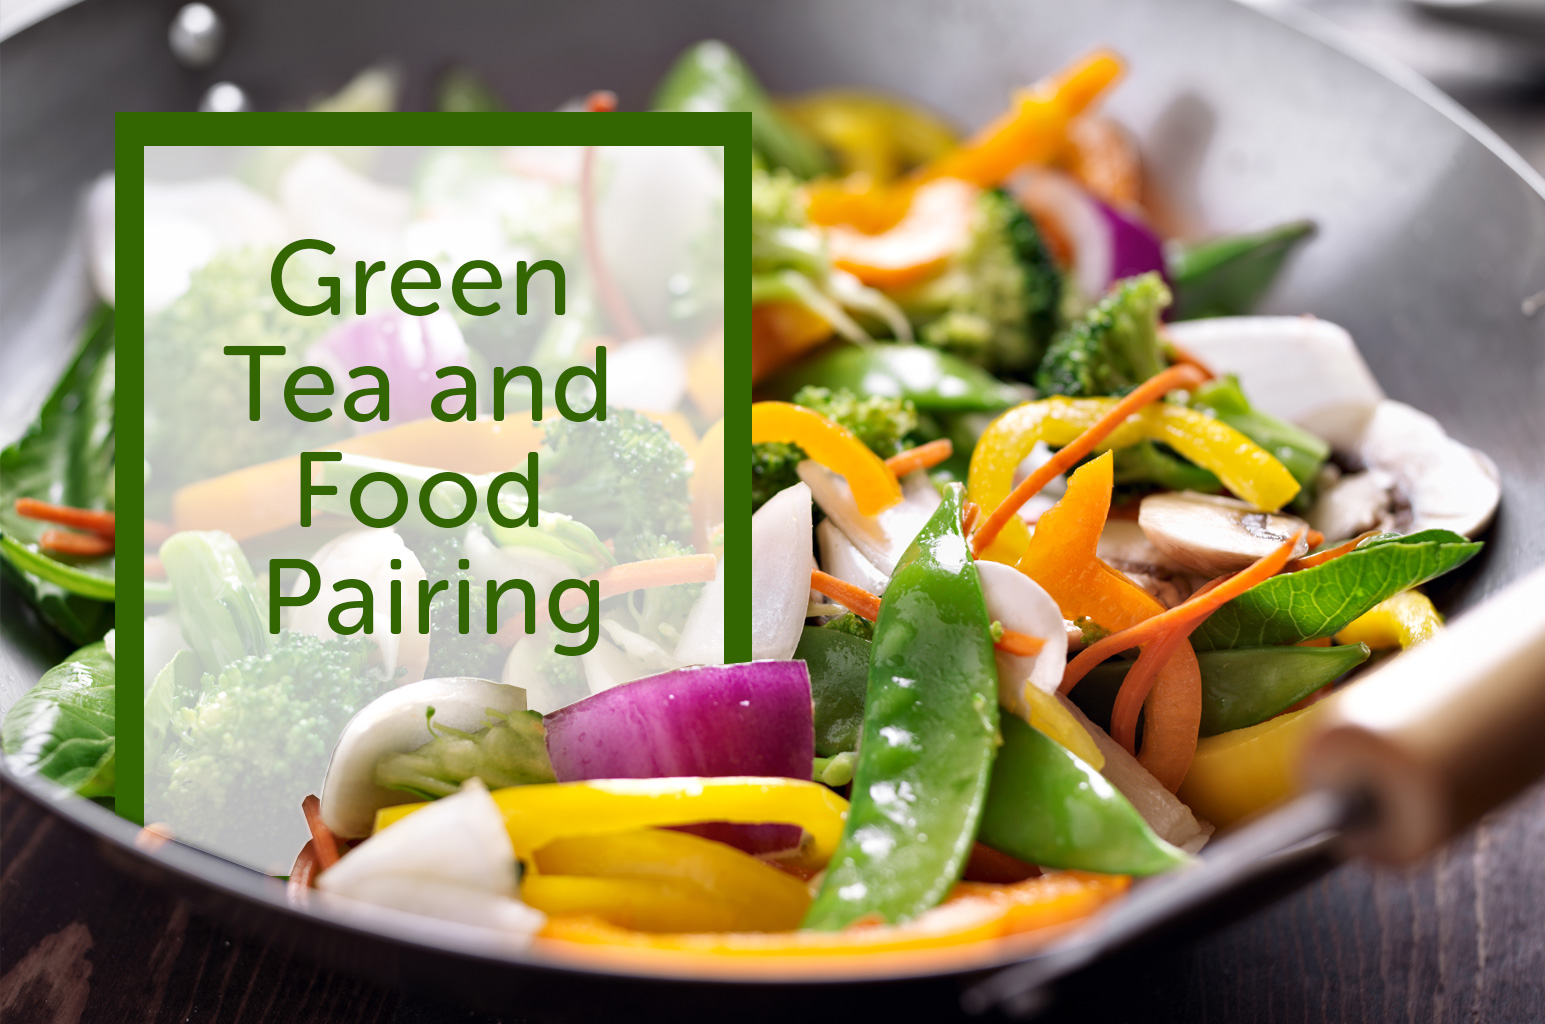 Green Tea: The Perfect Compliment to a Healthy Meal